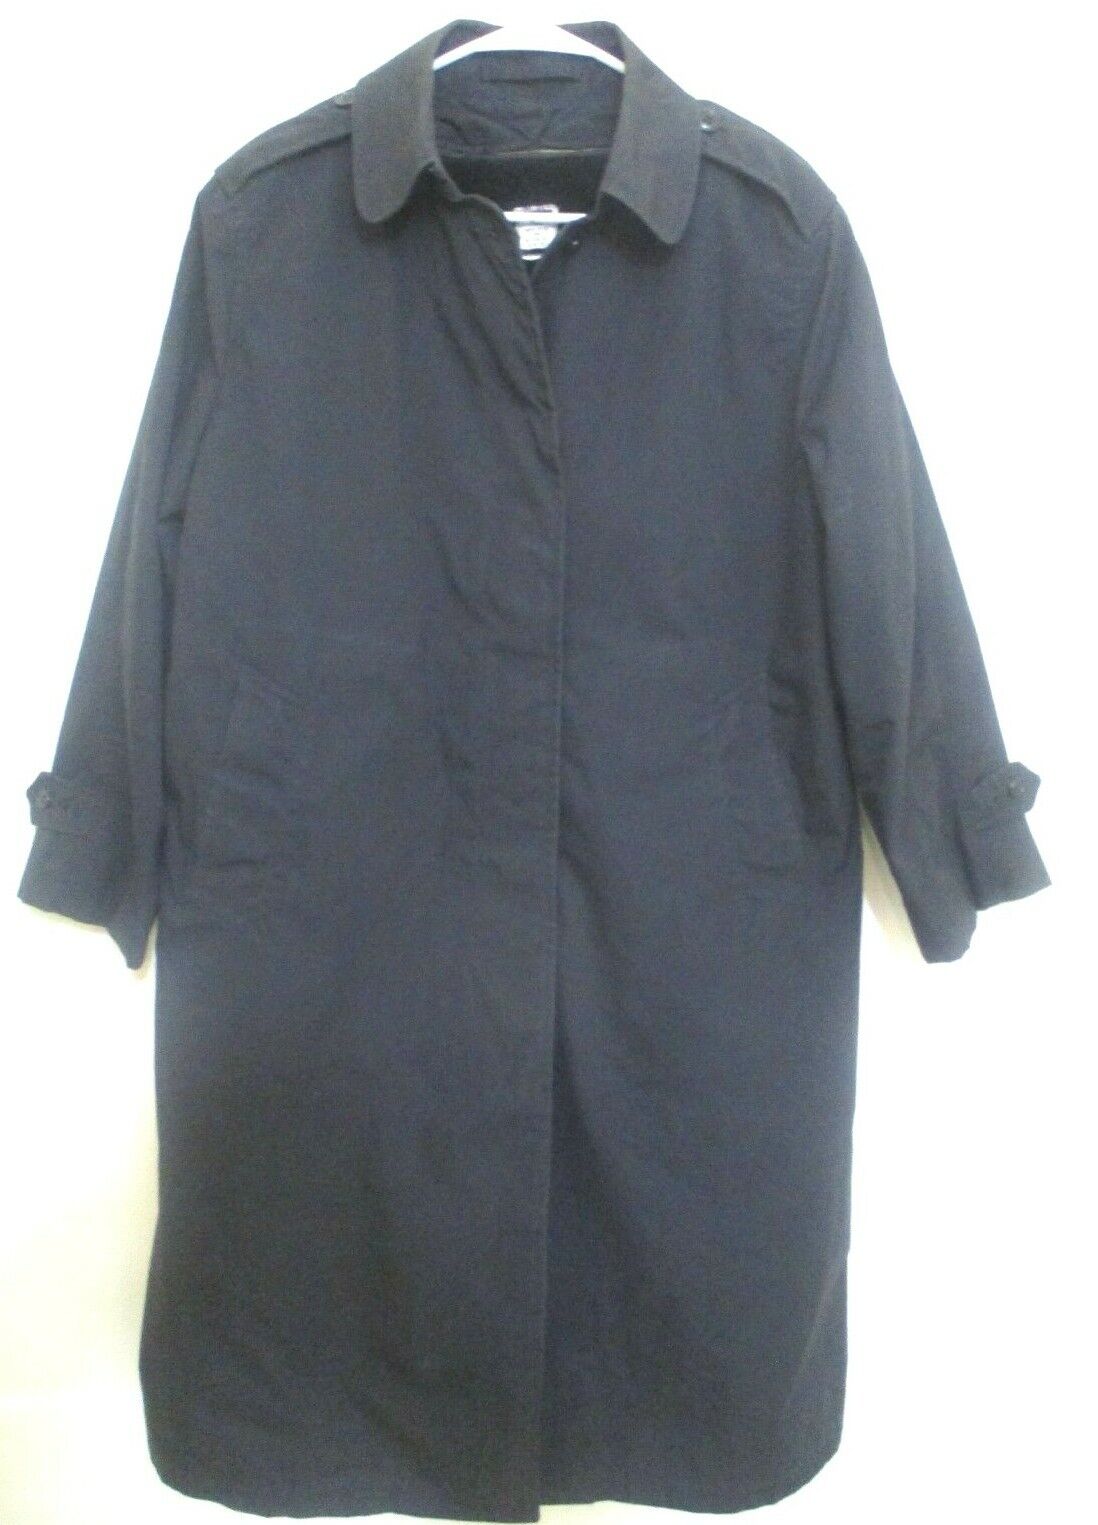 DSCP Military US Army Blue Trench Coat Sz 14S Women's w/ Zip Out Liner Raincoat 